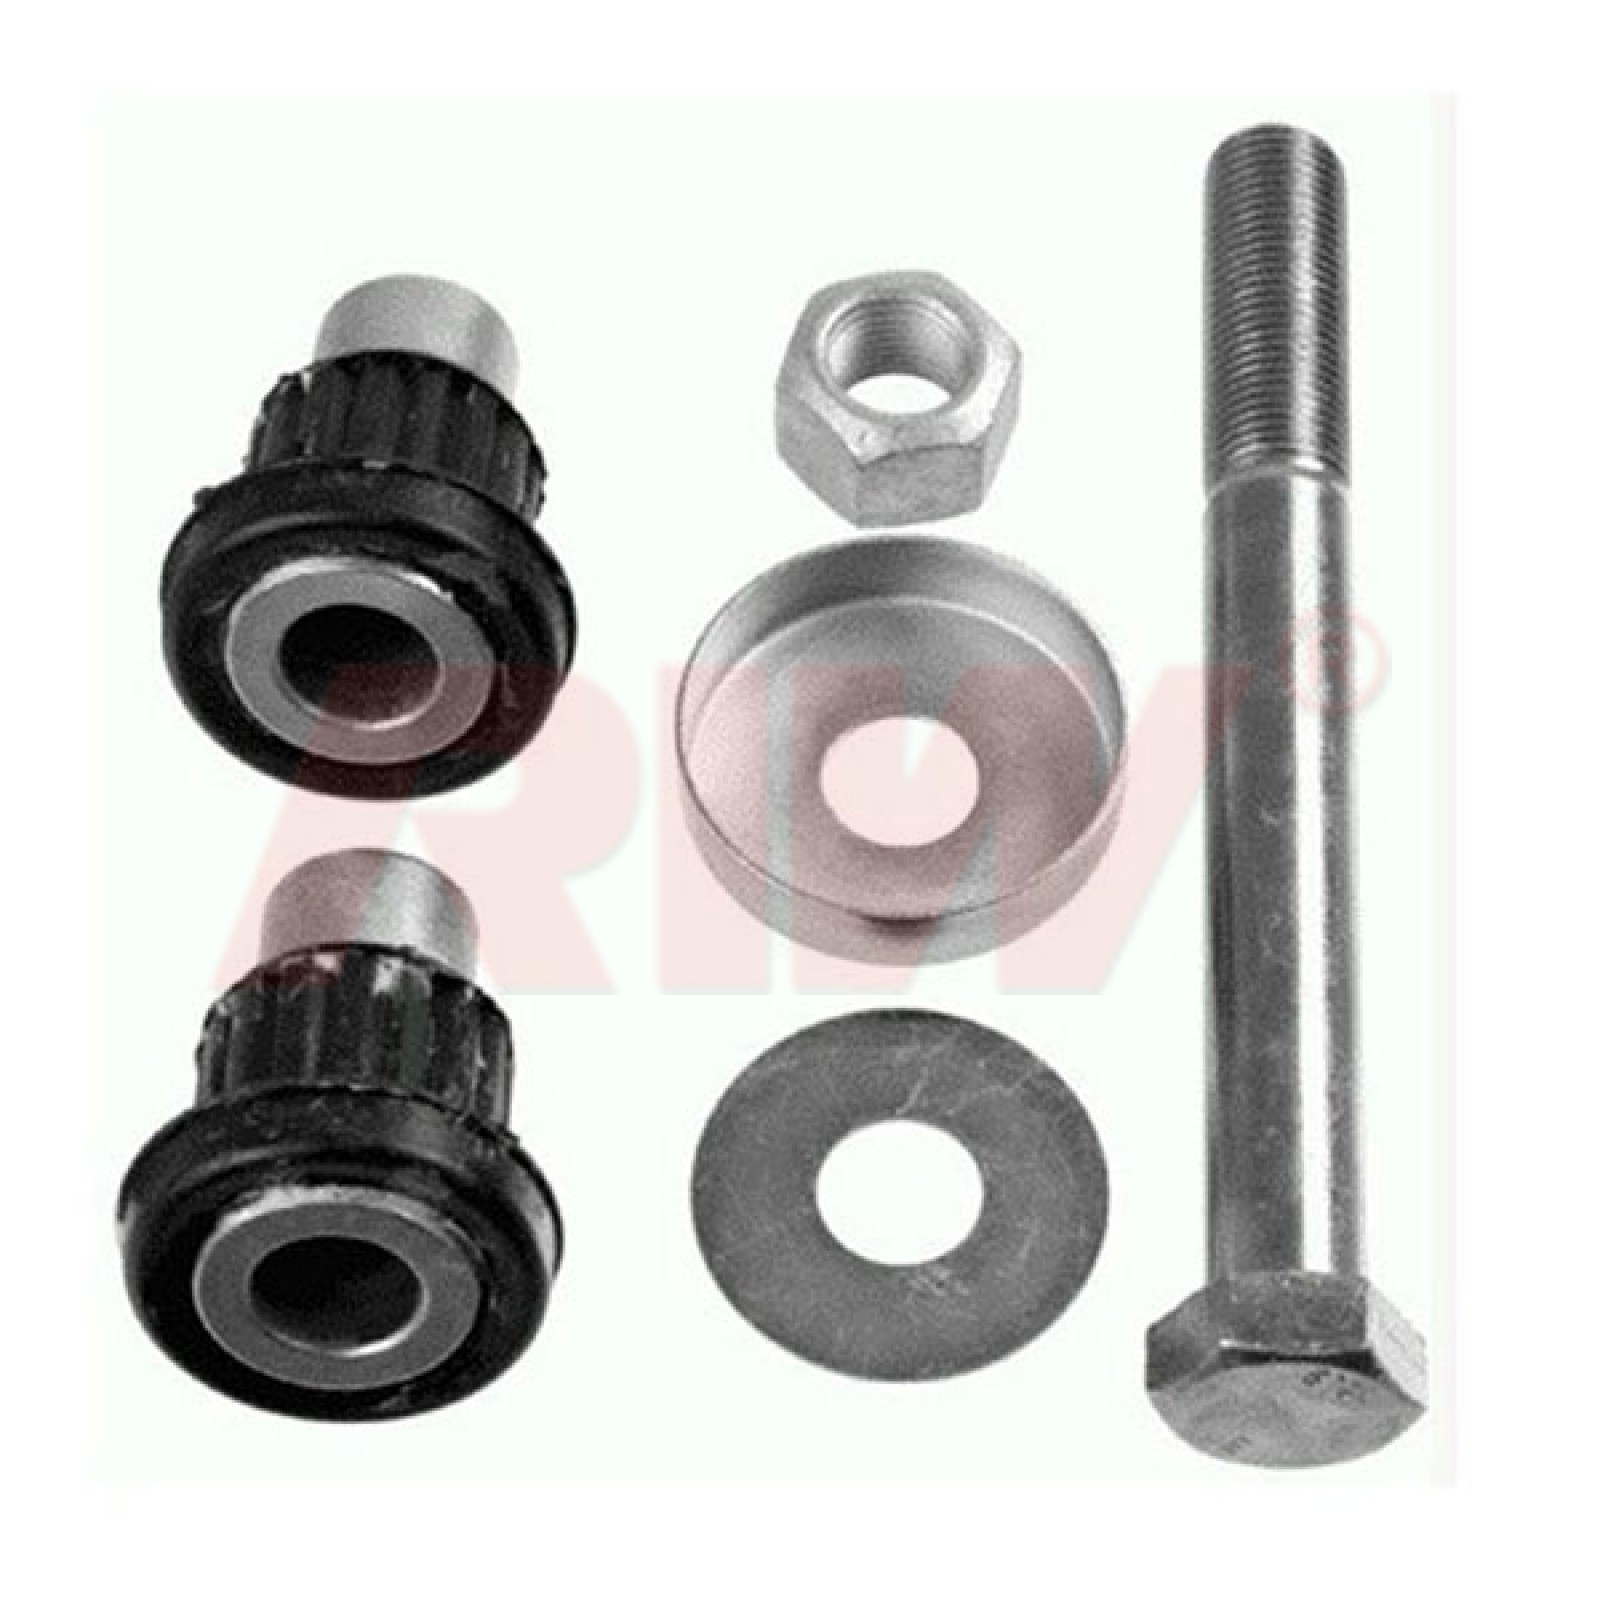 MERCEDES S CLASS (W116) 1972 - 1980 Axle Support Bushing